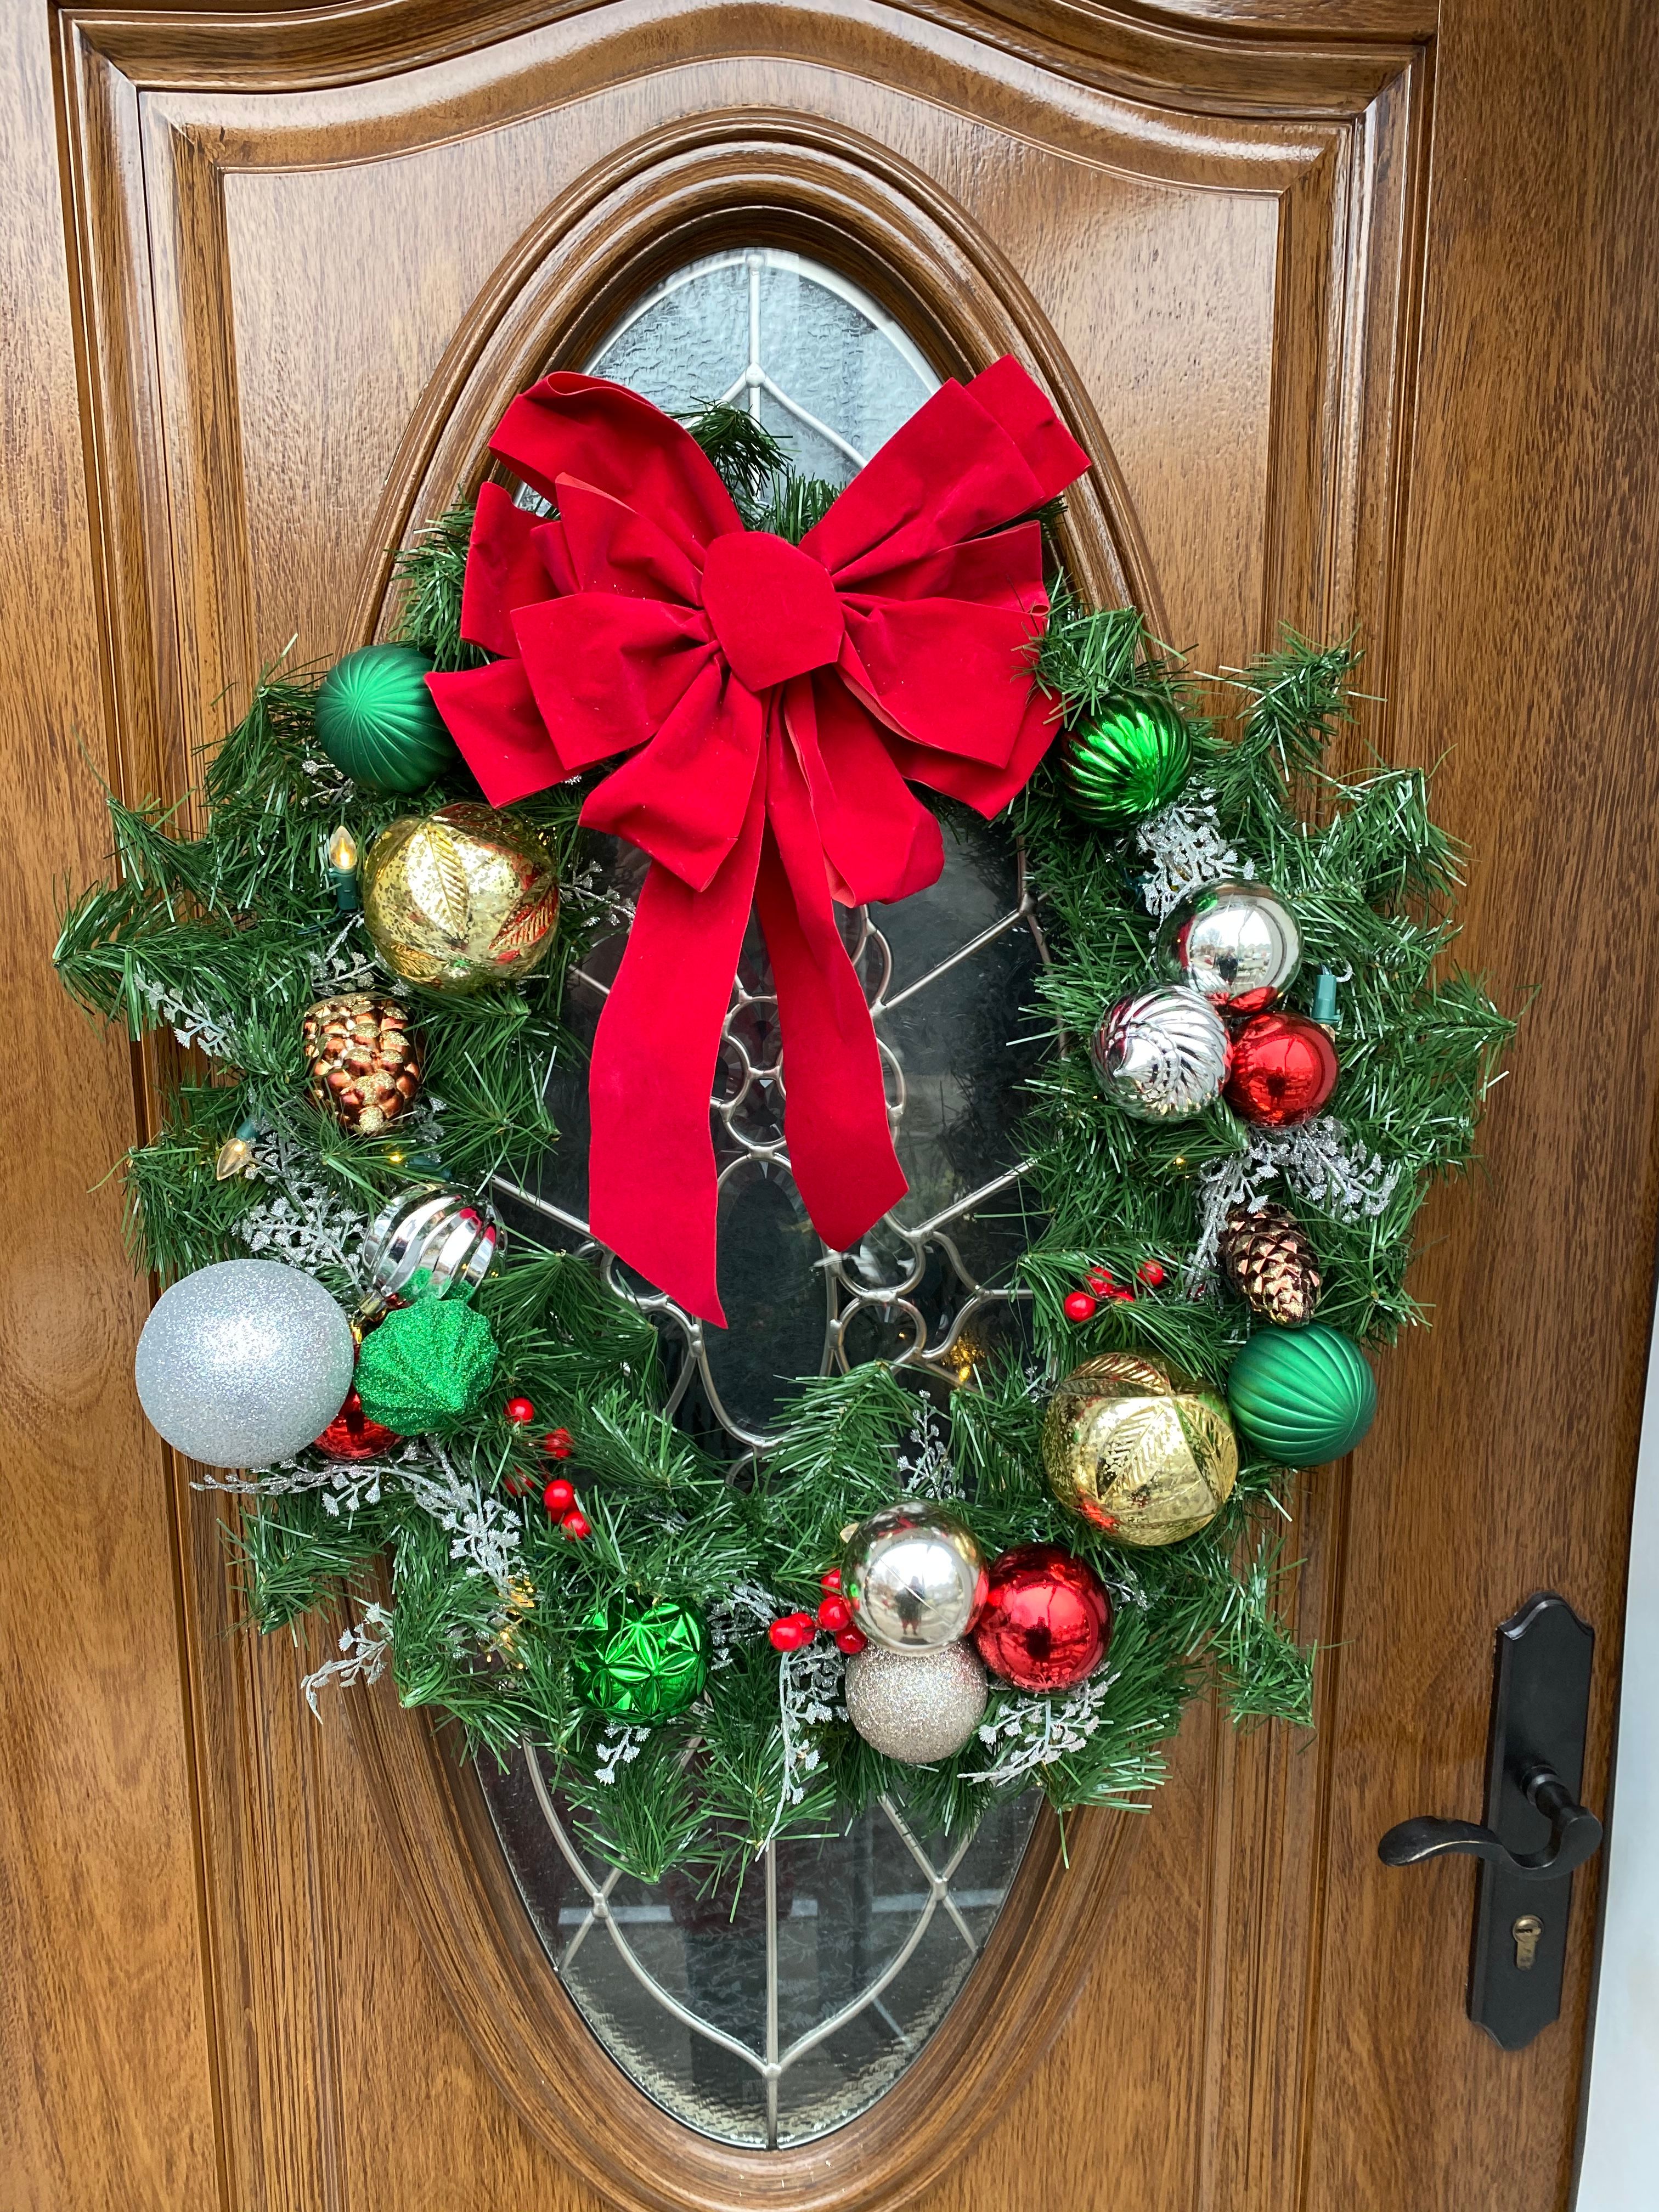 A decorated Christmas wreath on front door